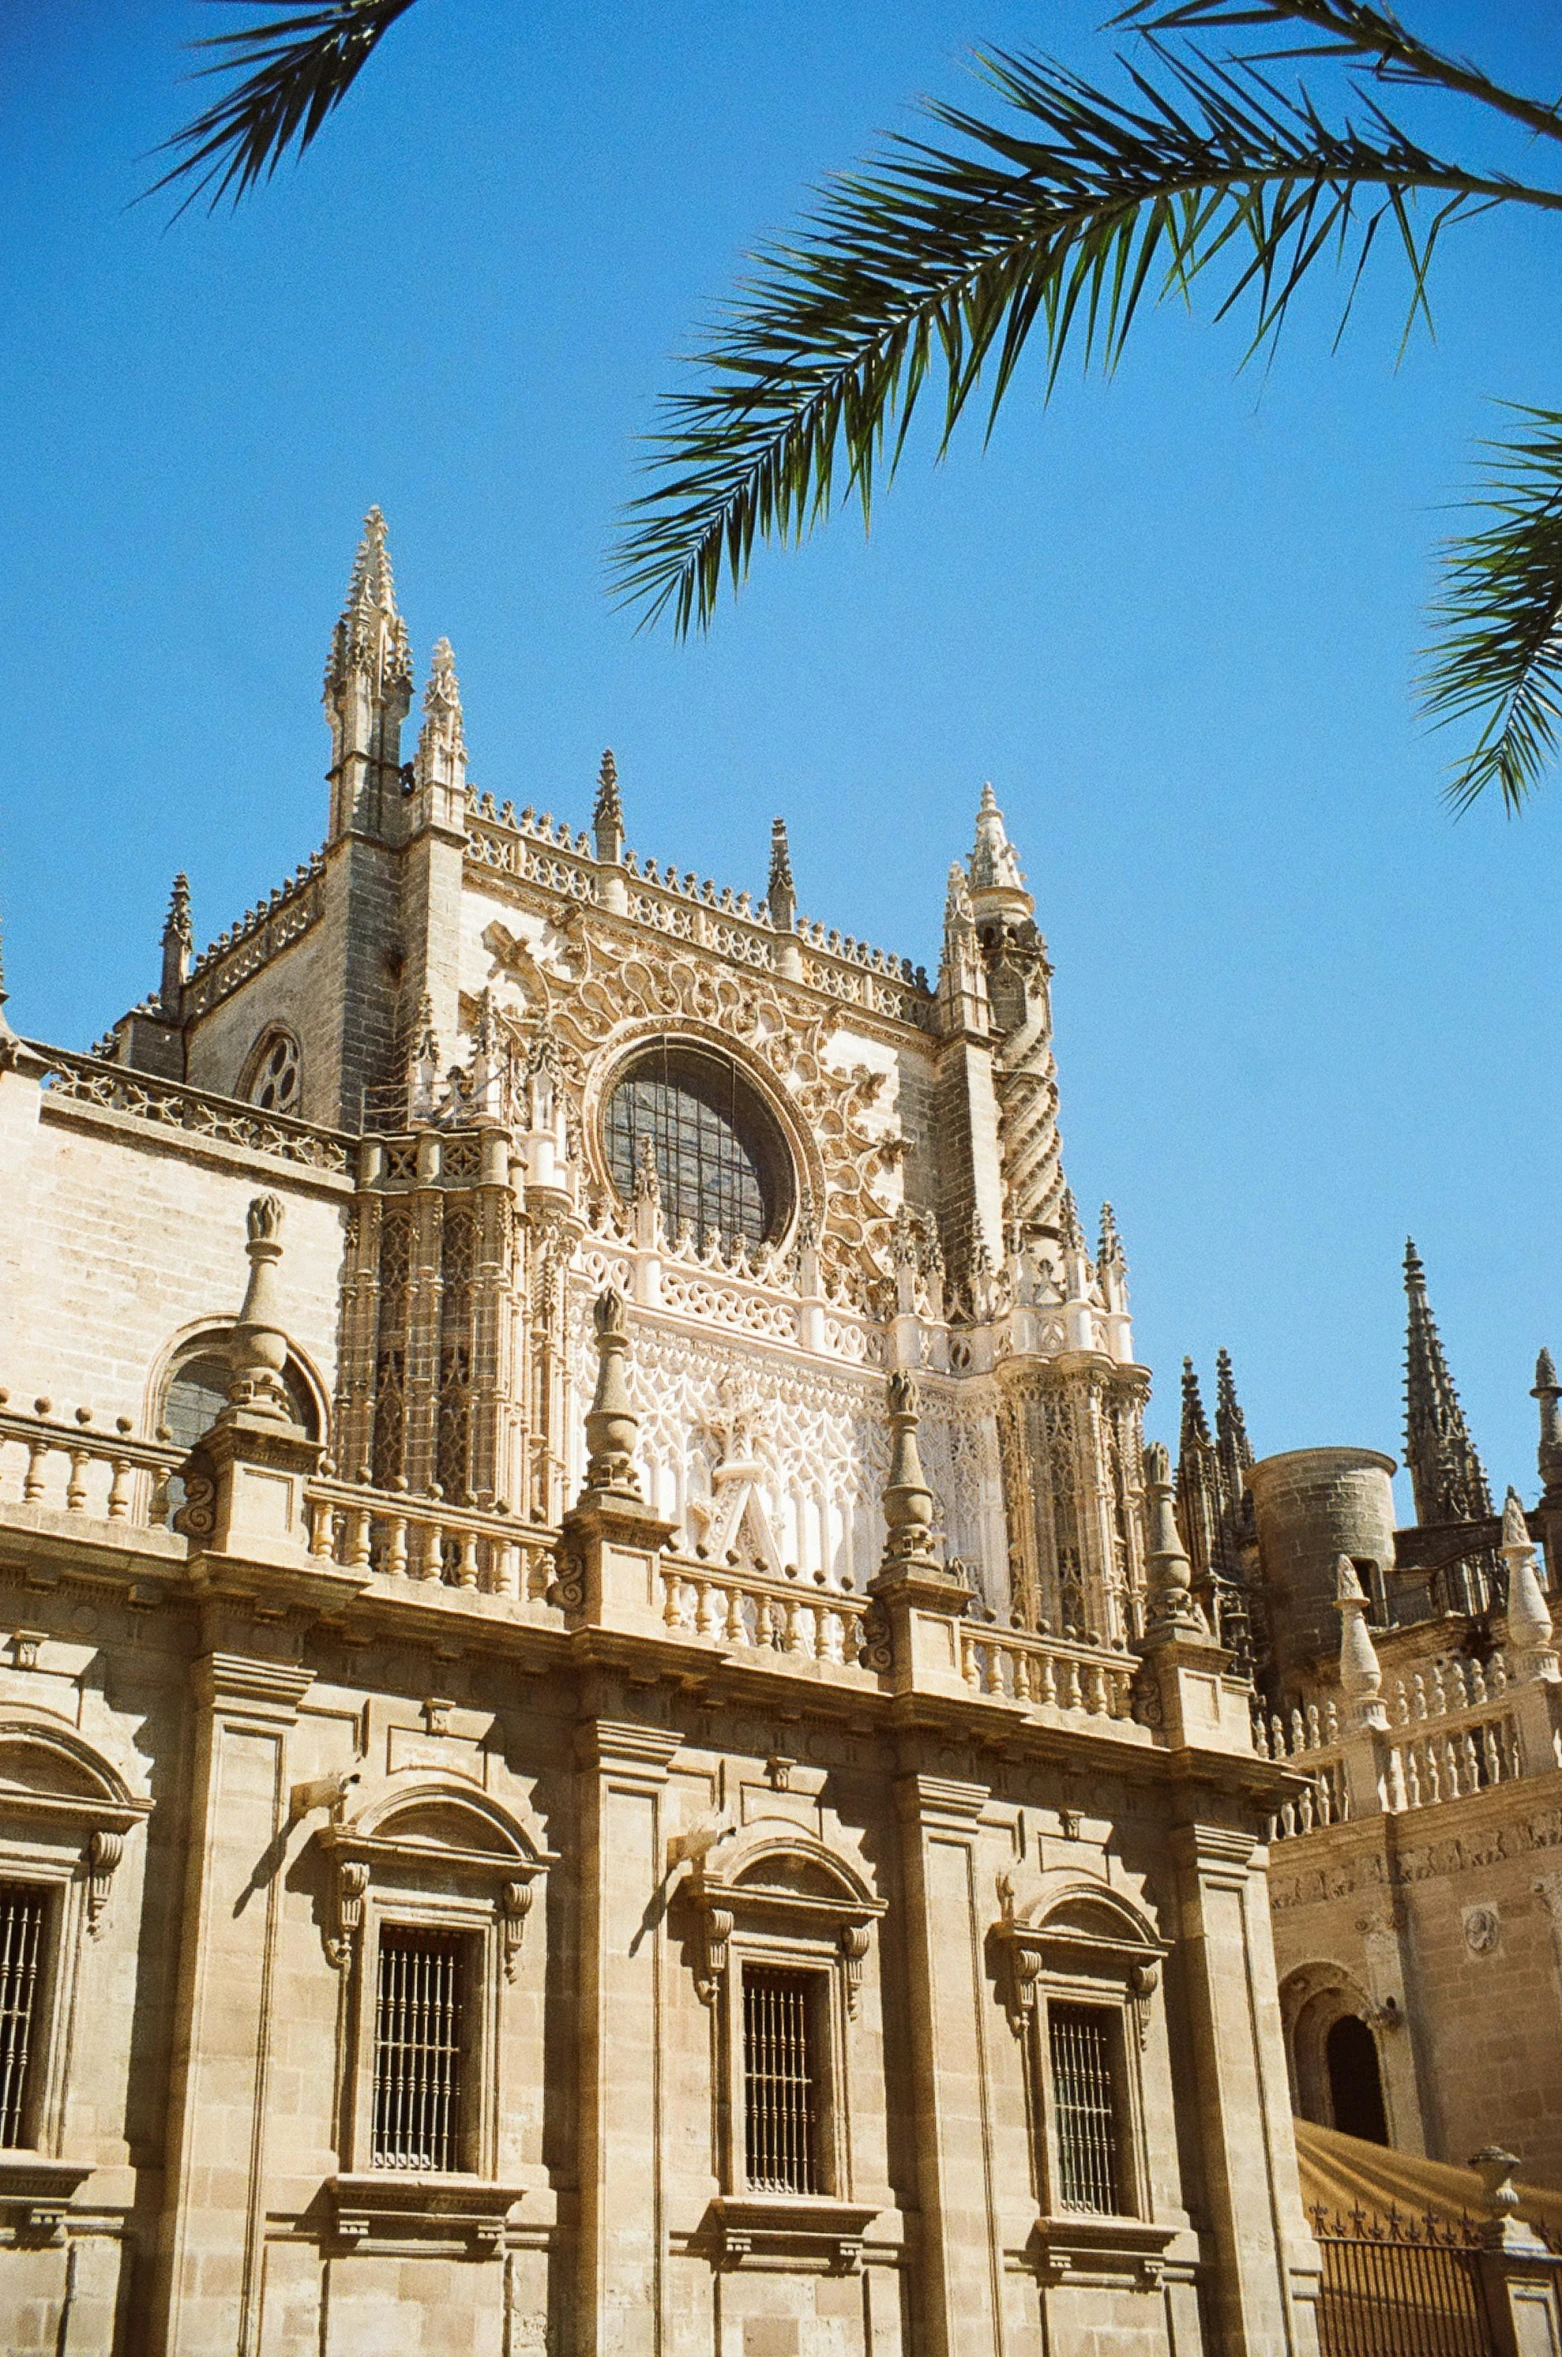 a cathedral with tall gothic architecture, some pointed windows and palm trees